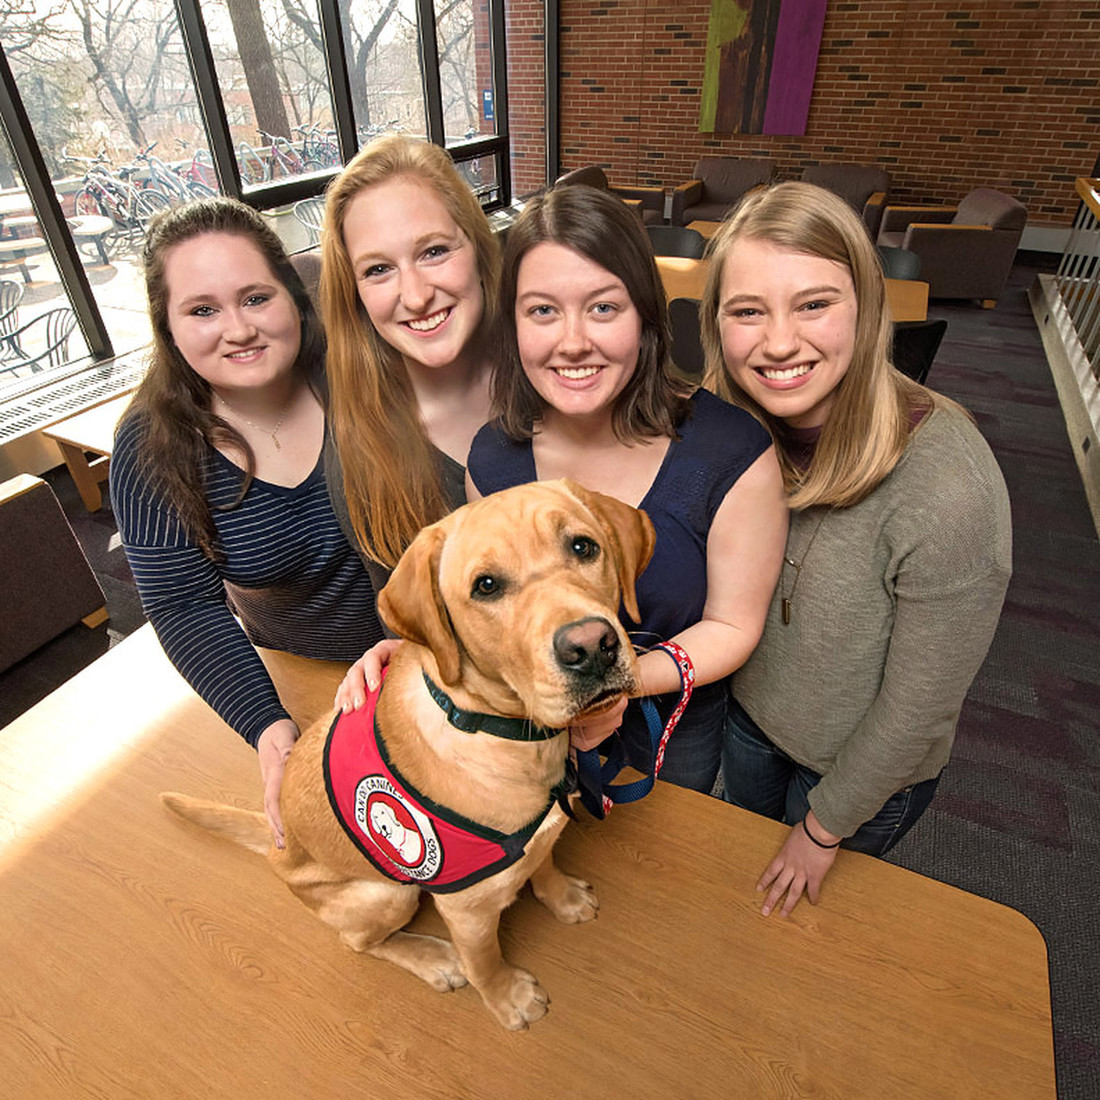 Four students with their yellow labrador retriever puppy wearing a service dog vest